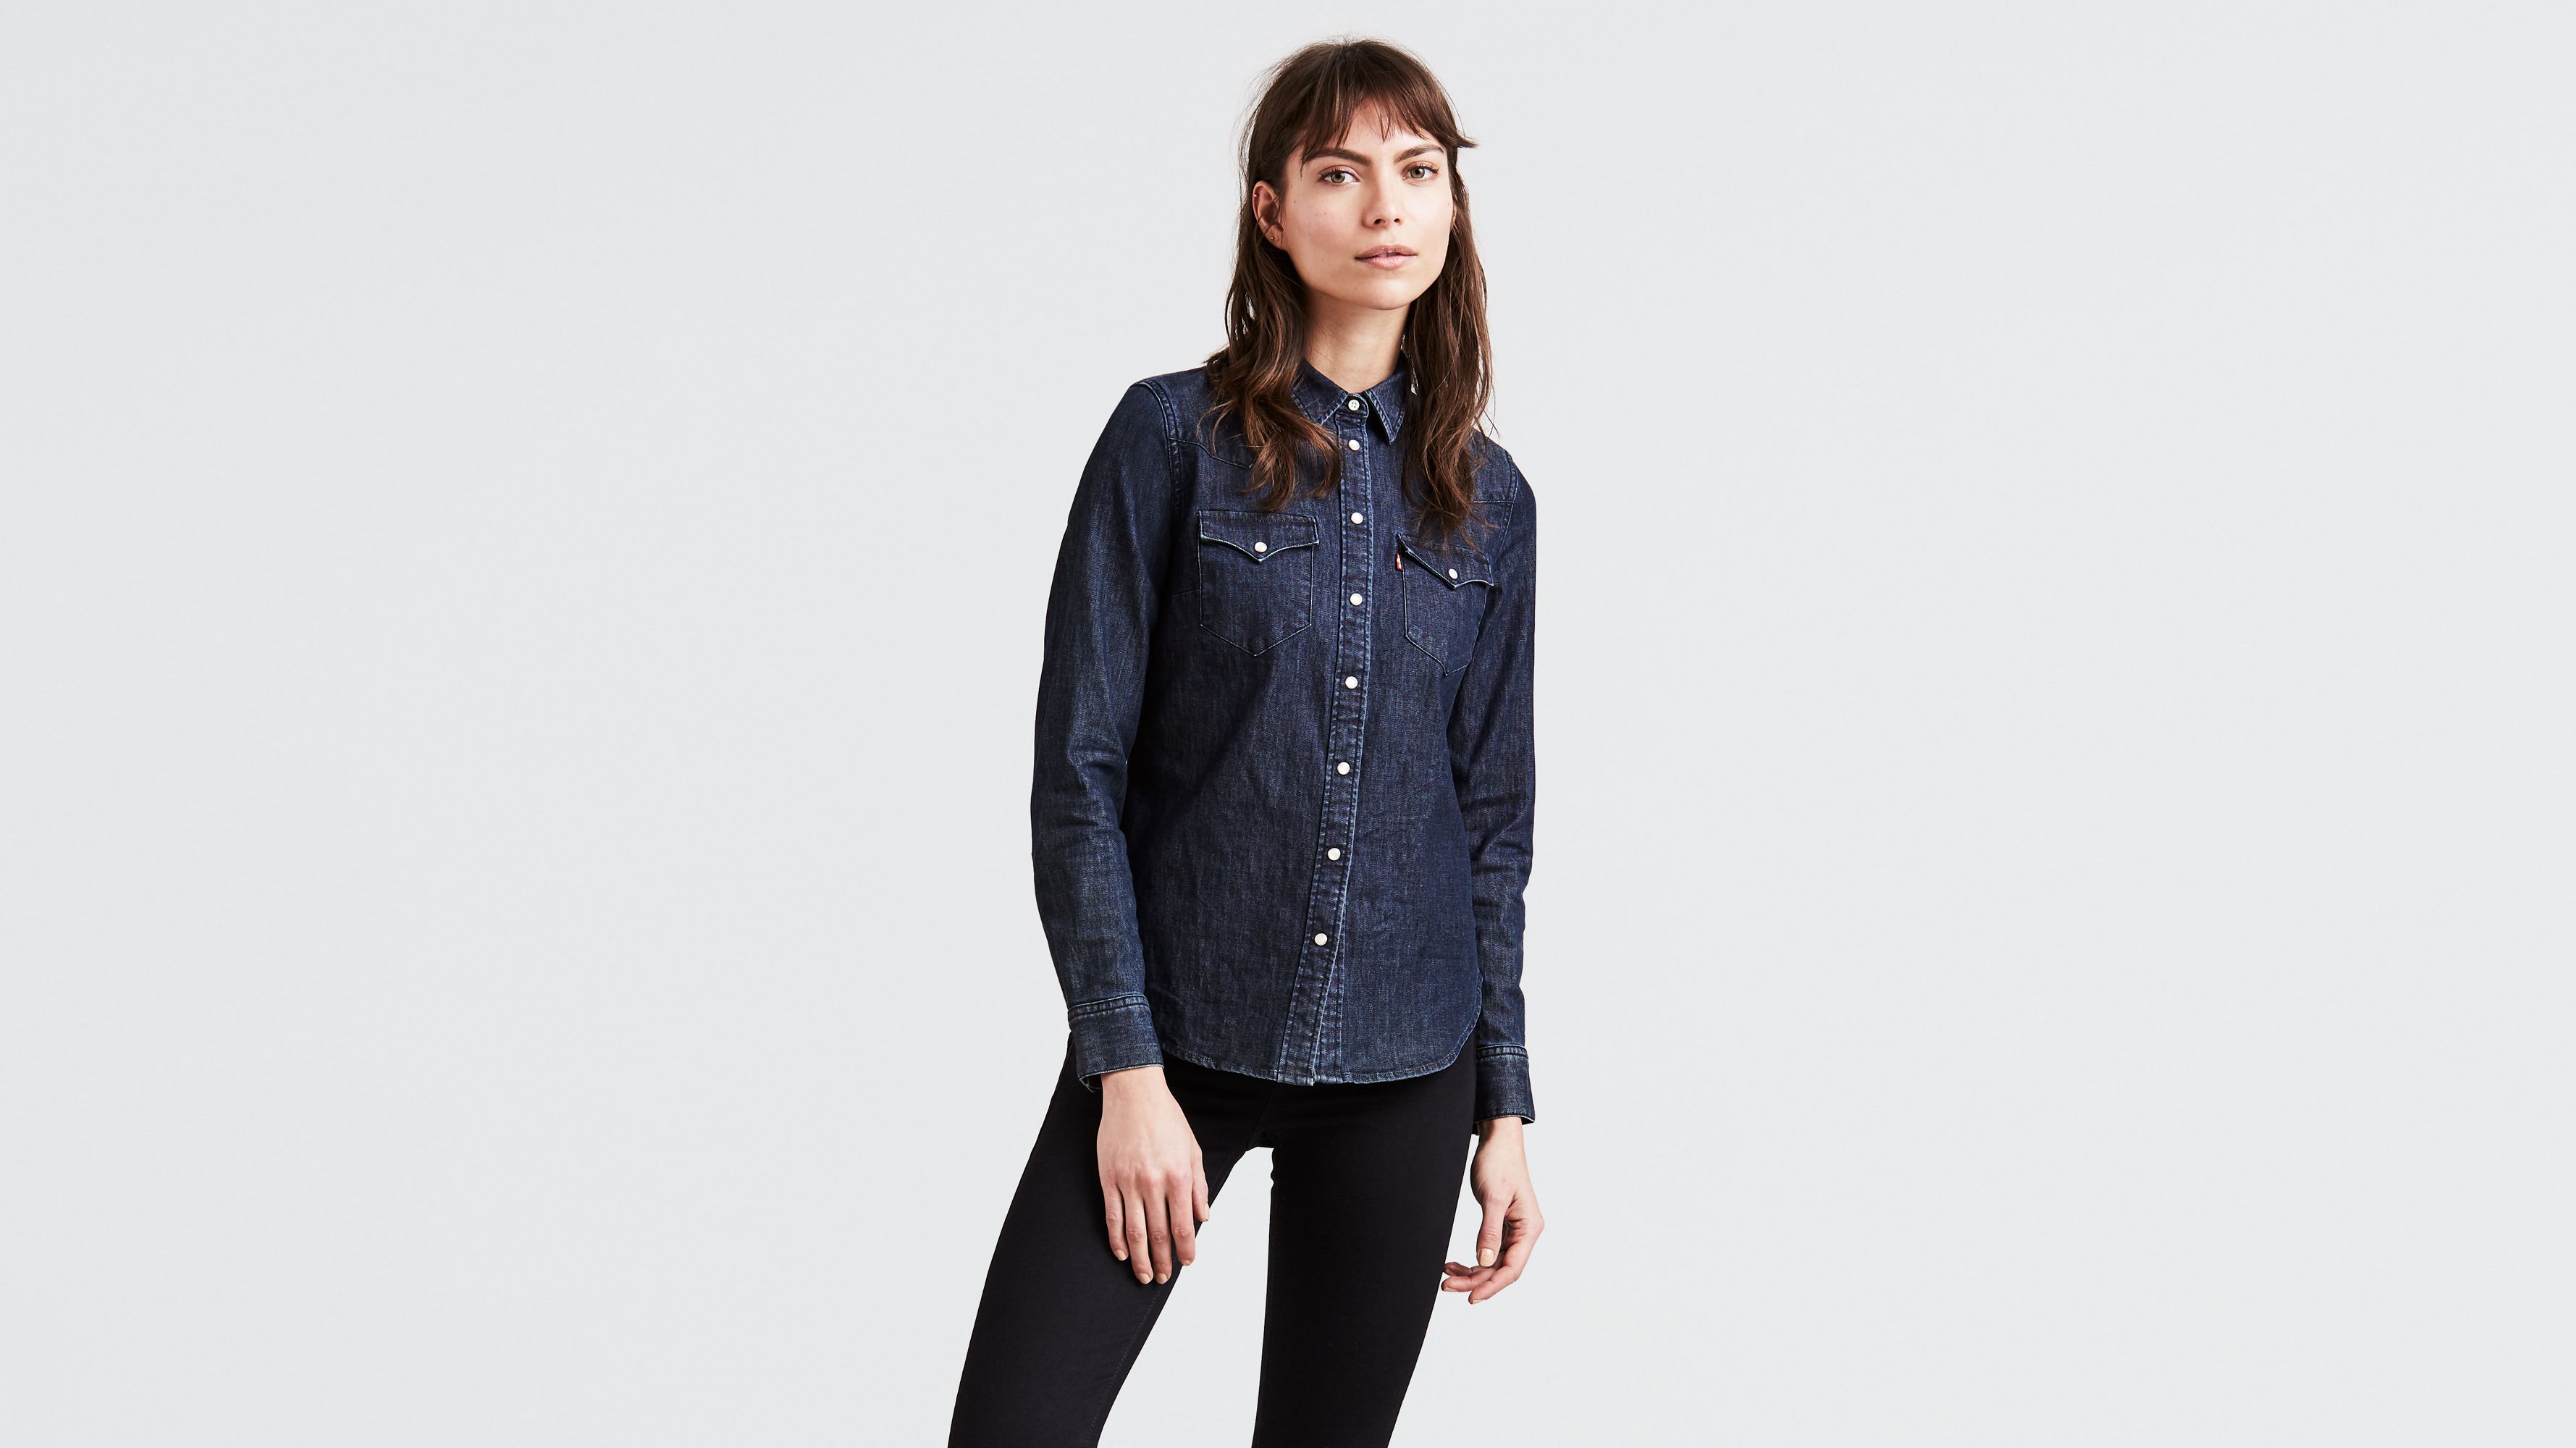 Levi's WT-SHIRTS DENIM Show / Off - Fast delivery | Spartoo Europe ! -  Clothing Shirts Women 69,60 €